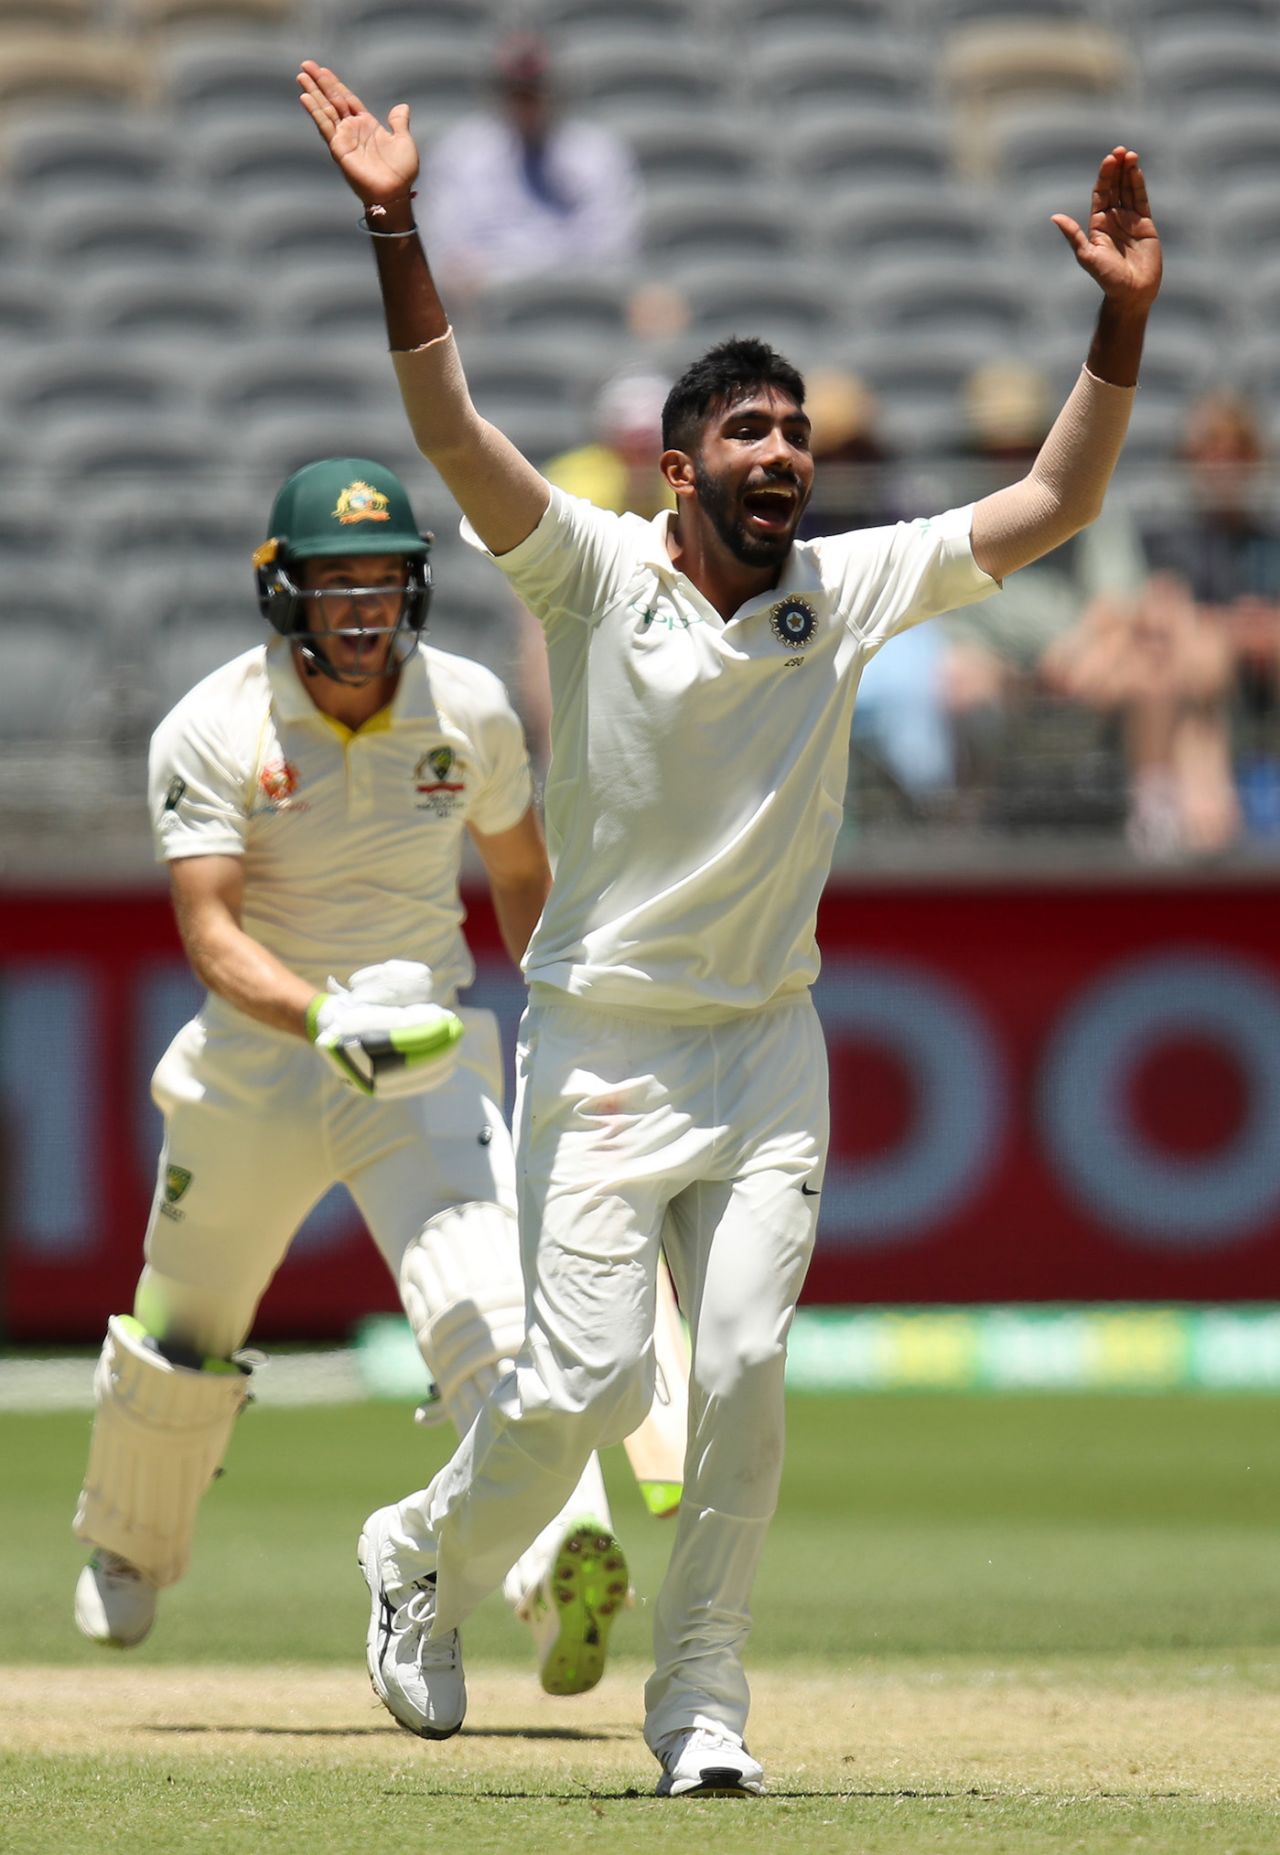 Jasprit Bumrah goes up in appeal, Australia v India, 2nd Test, Perth, 4th day, December 17, 2018